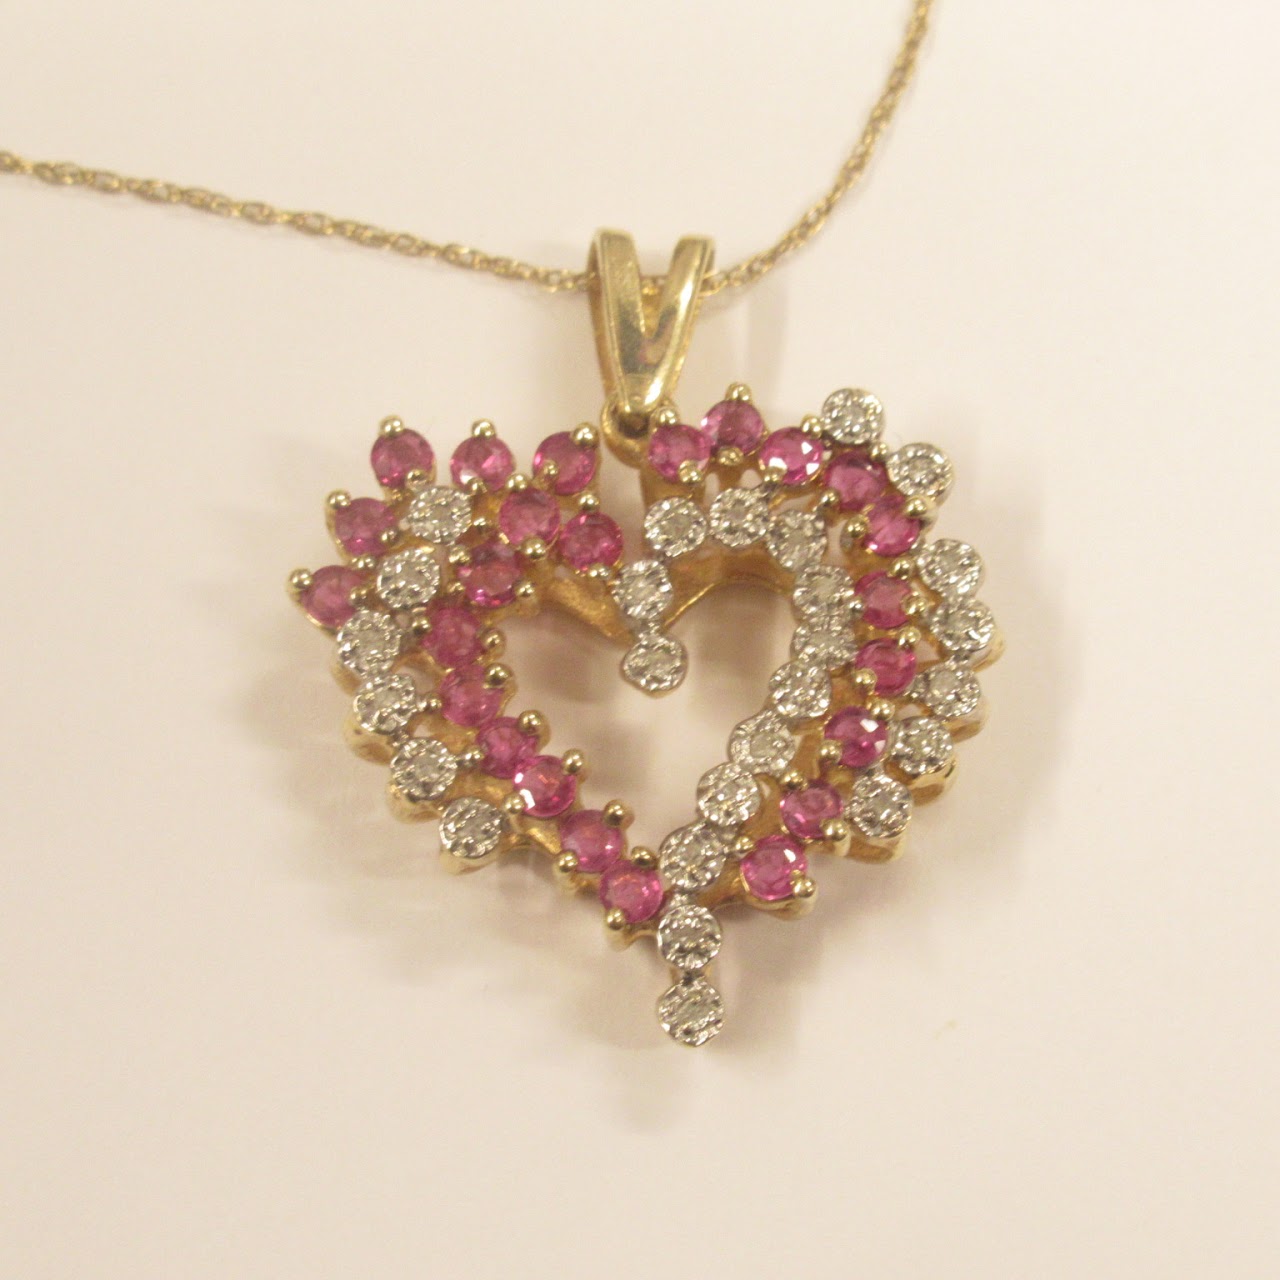 10K Gold, Diamond, and Pink Stone Heart Pendant Necklace